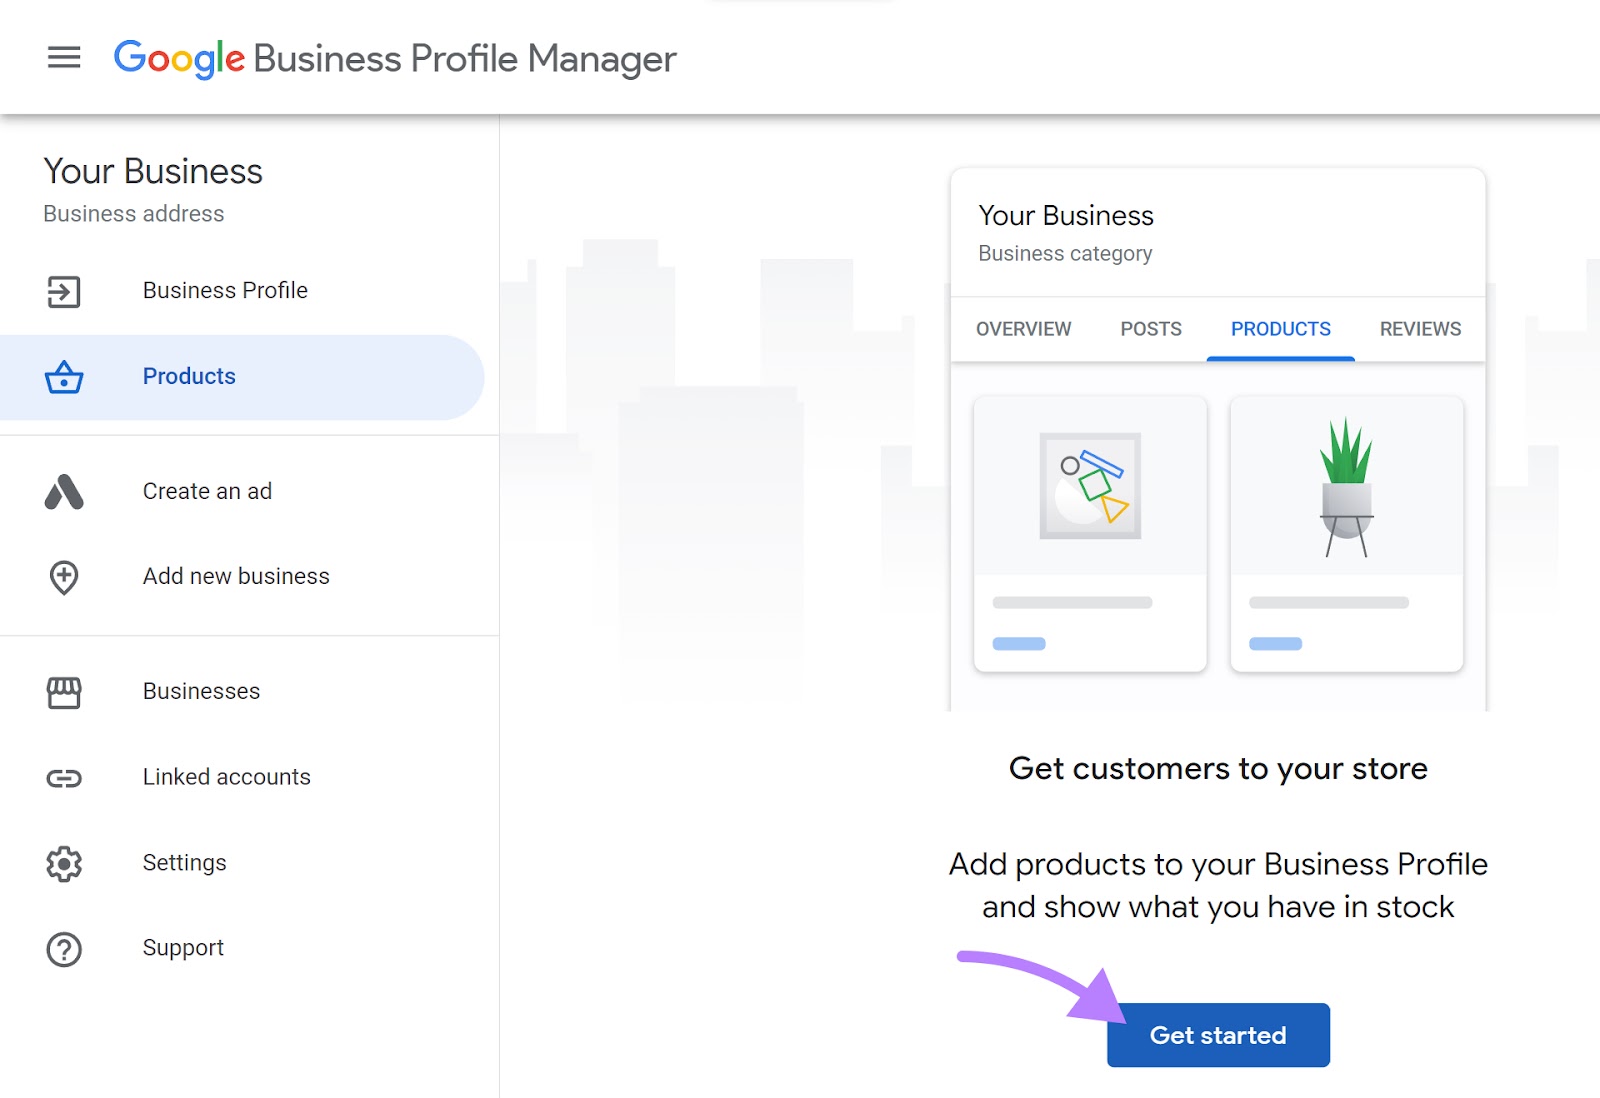 Get started with adding your products